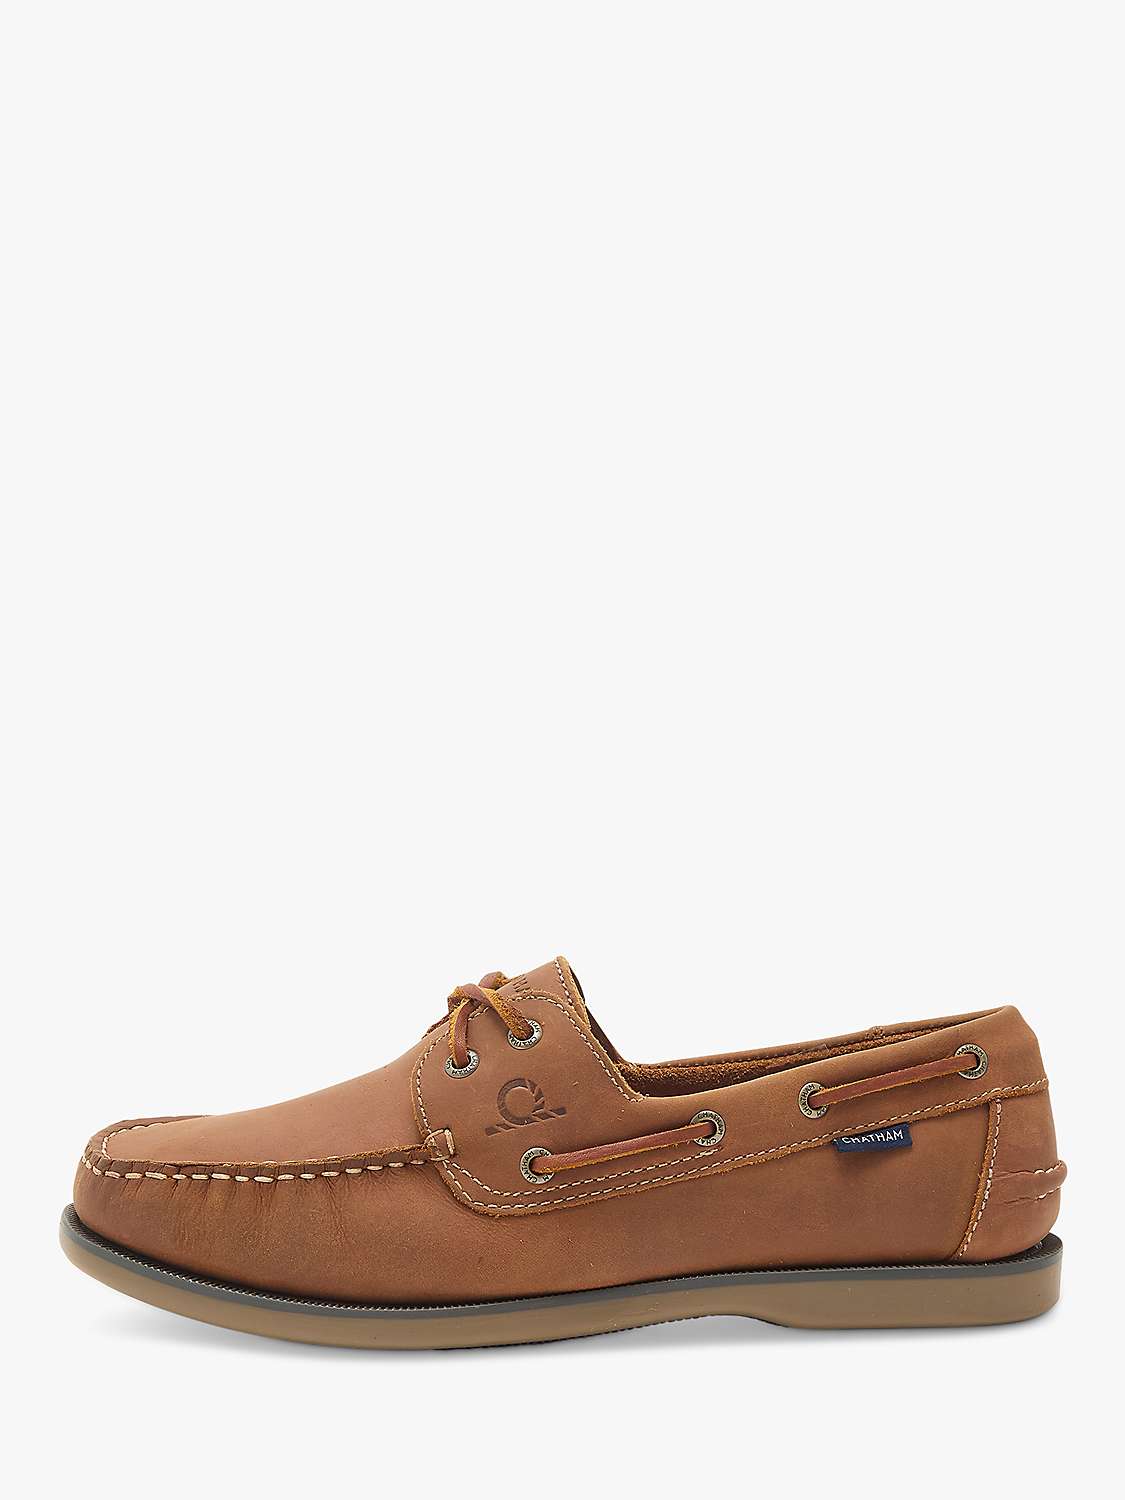 Buy Chatham Whitstable Leather Boat Shoes, Tan Online at johnlewis.com